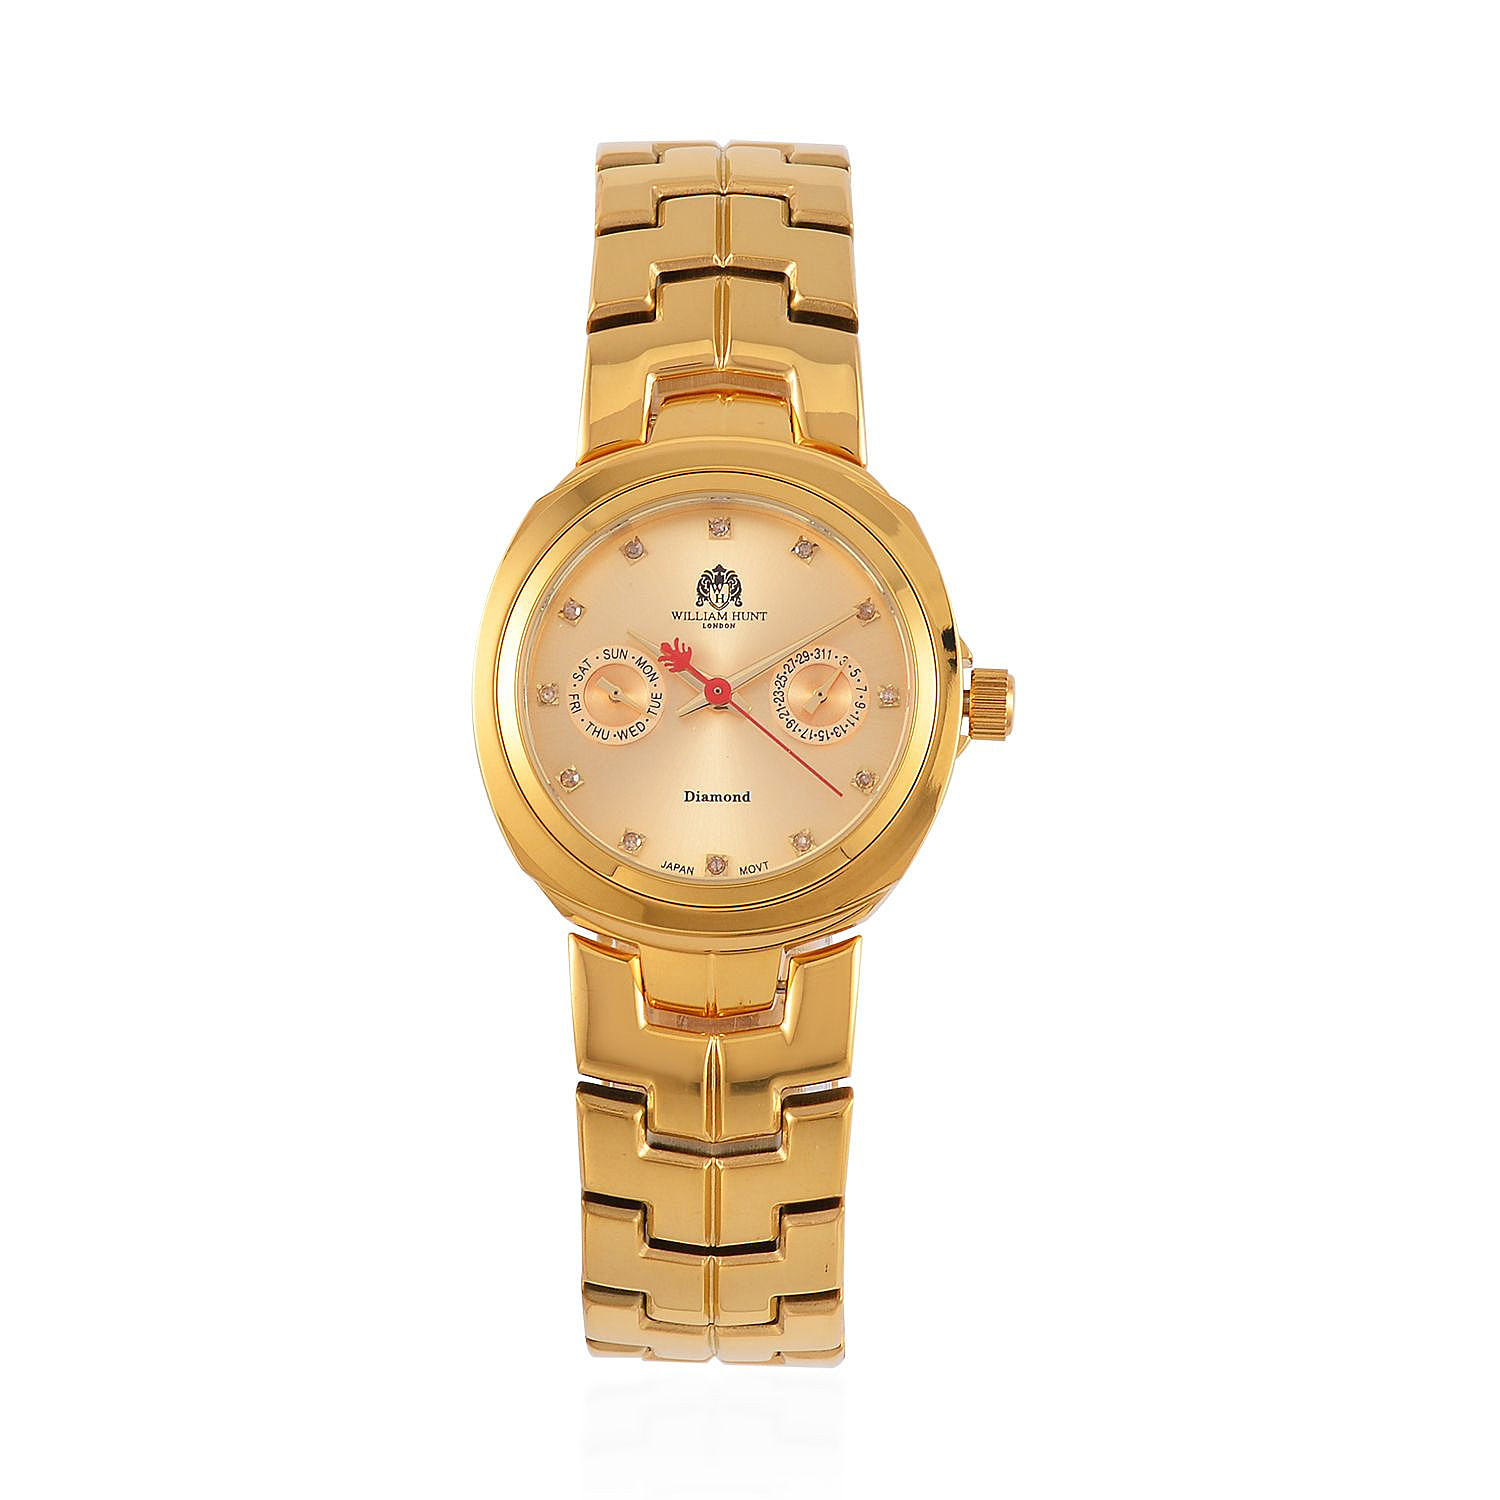 William Hunt - Champagne Diamond Studded Japan Movt. 5ATM Water Resistant Watch with Golden Stainless Steel Chain Strap